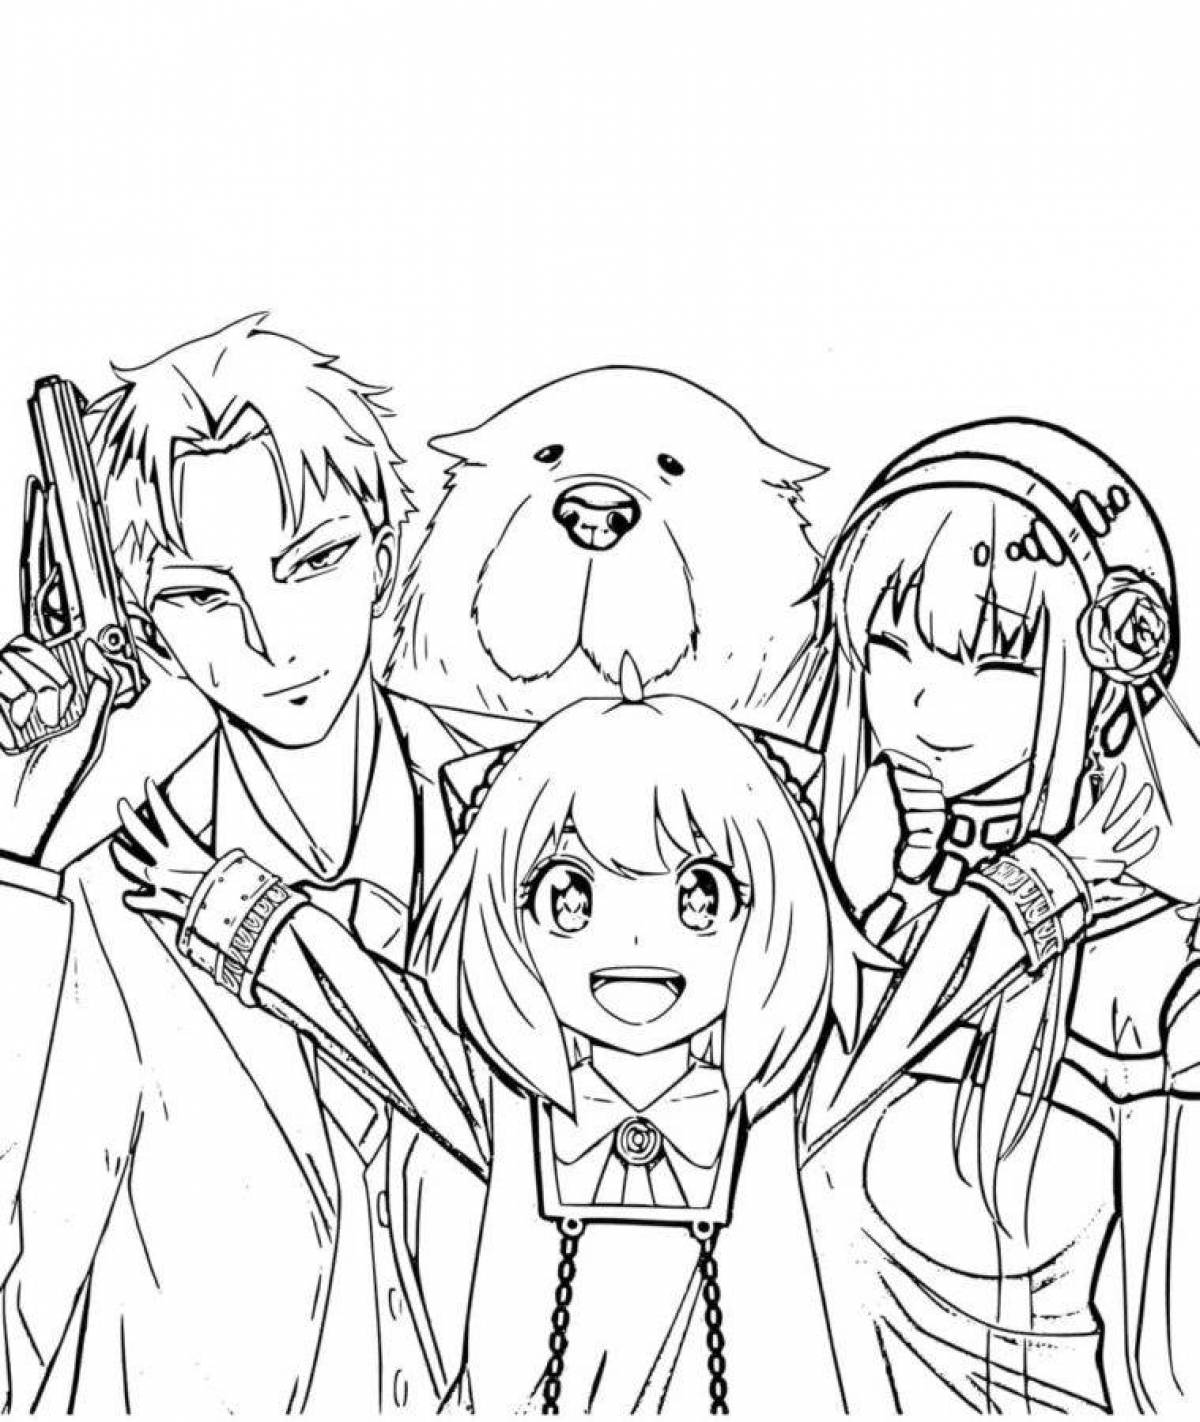 Colorful spy family coloring page